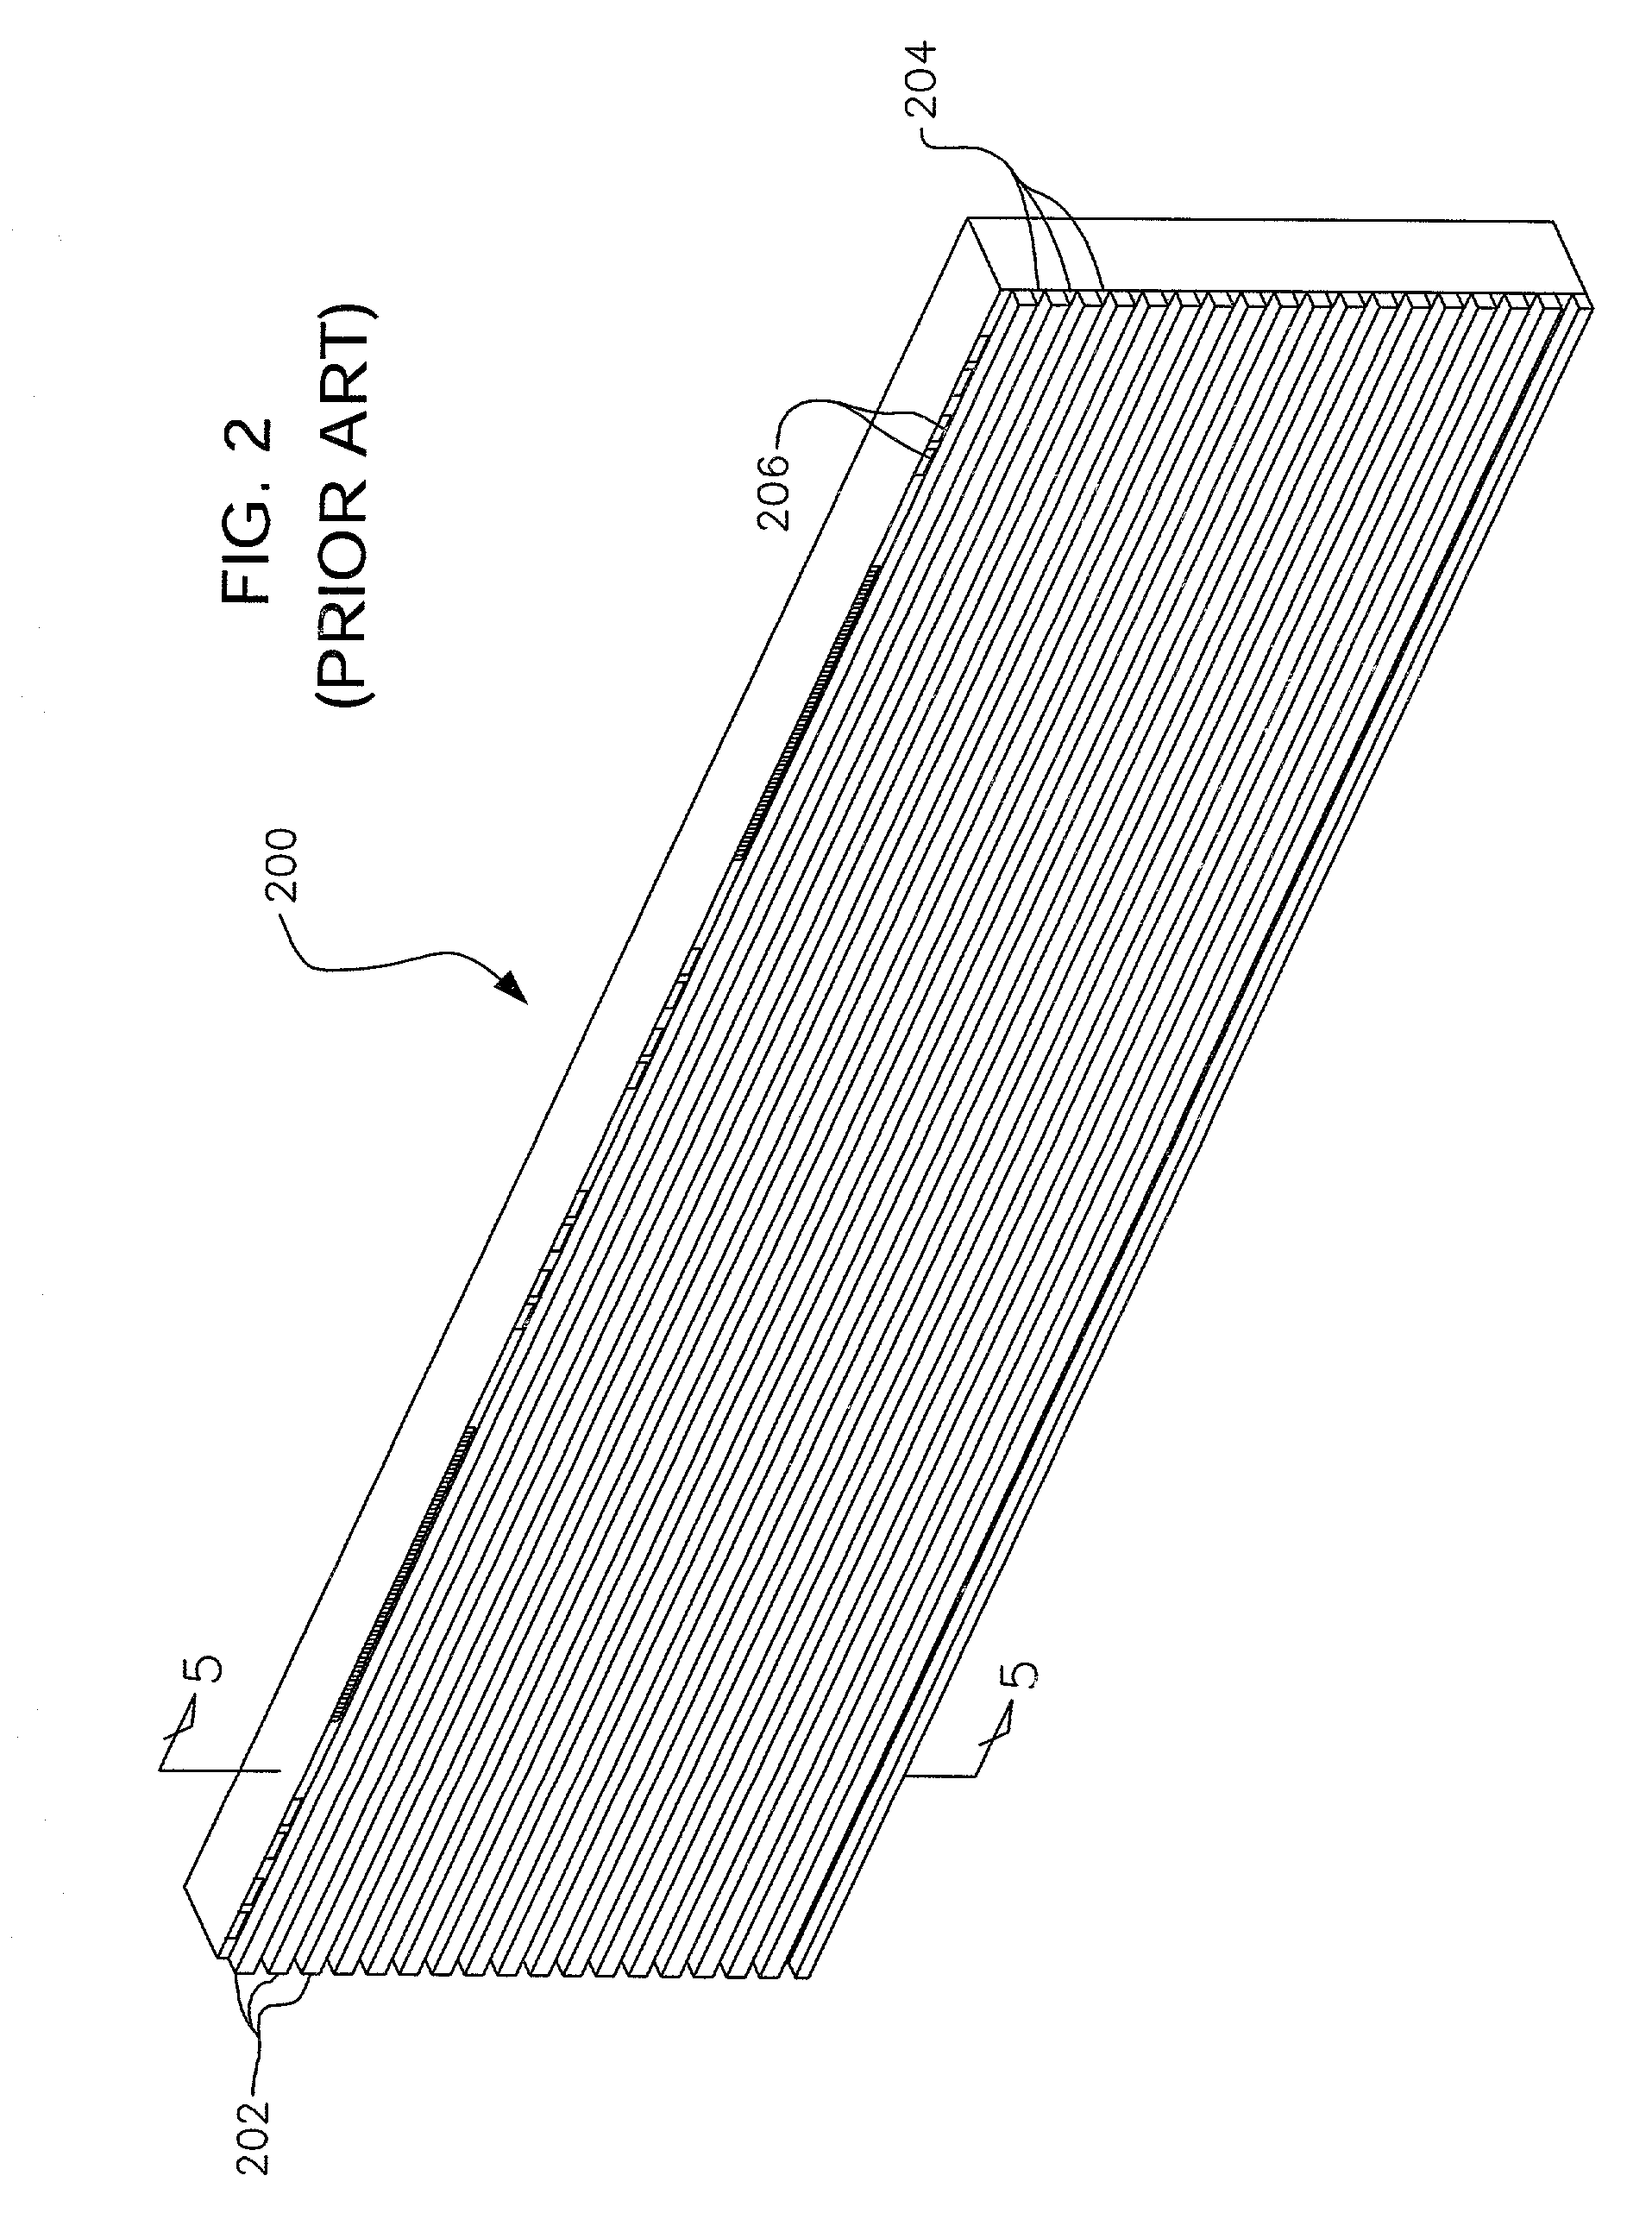 Thin-film tape head having single groove formed in head body and corresponding process